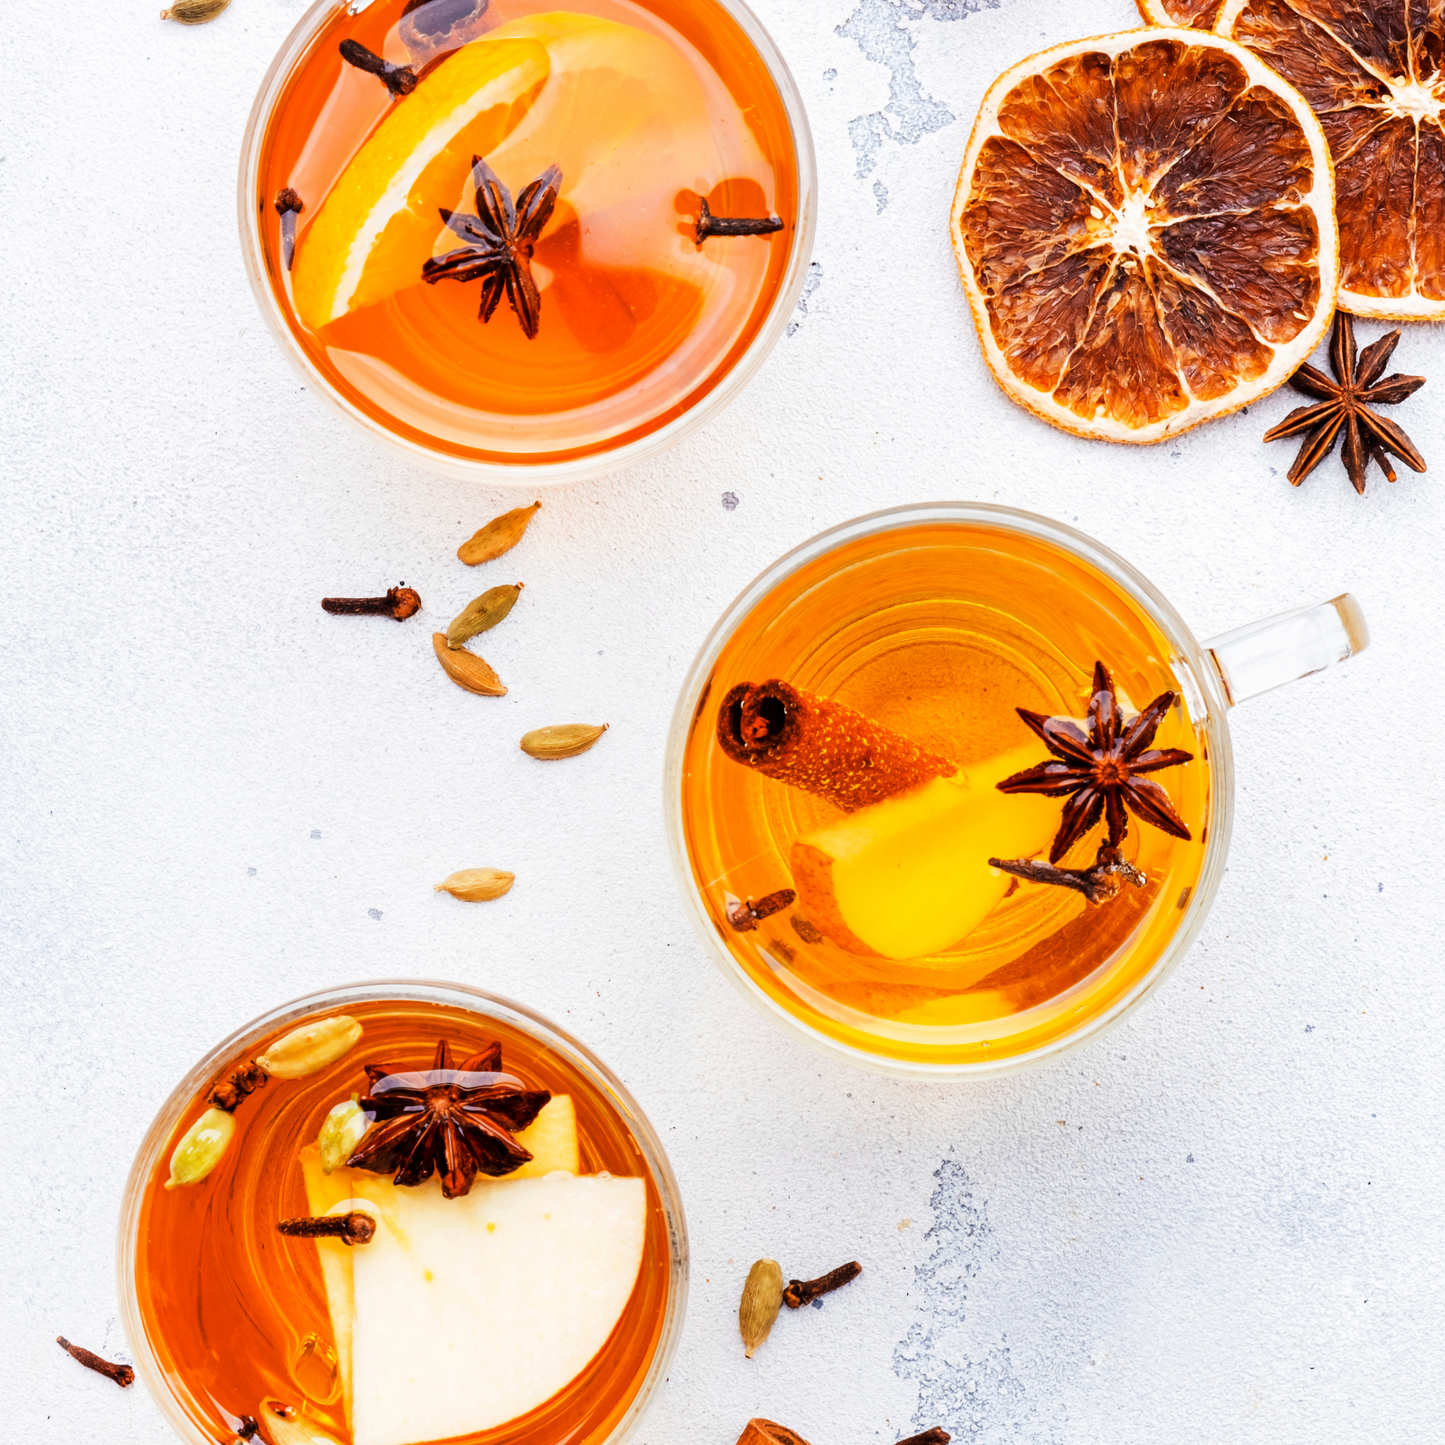 Load image into Gallery viewer, Get Cozy with Hive Craft&amp;#39;s Hot Toddy: Your Warm Winter Companion
